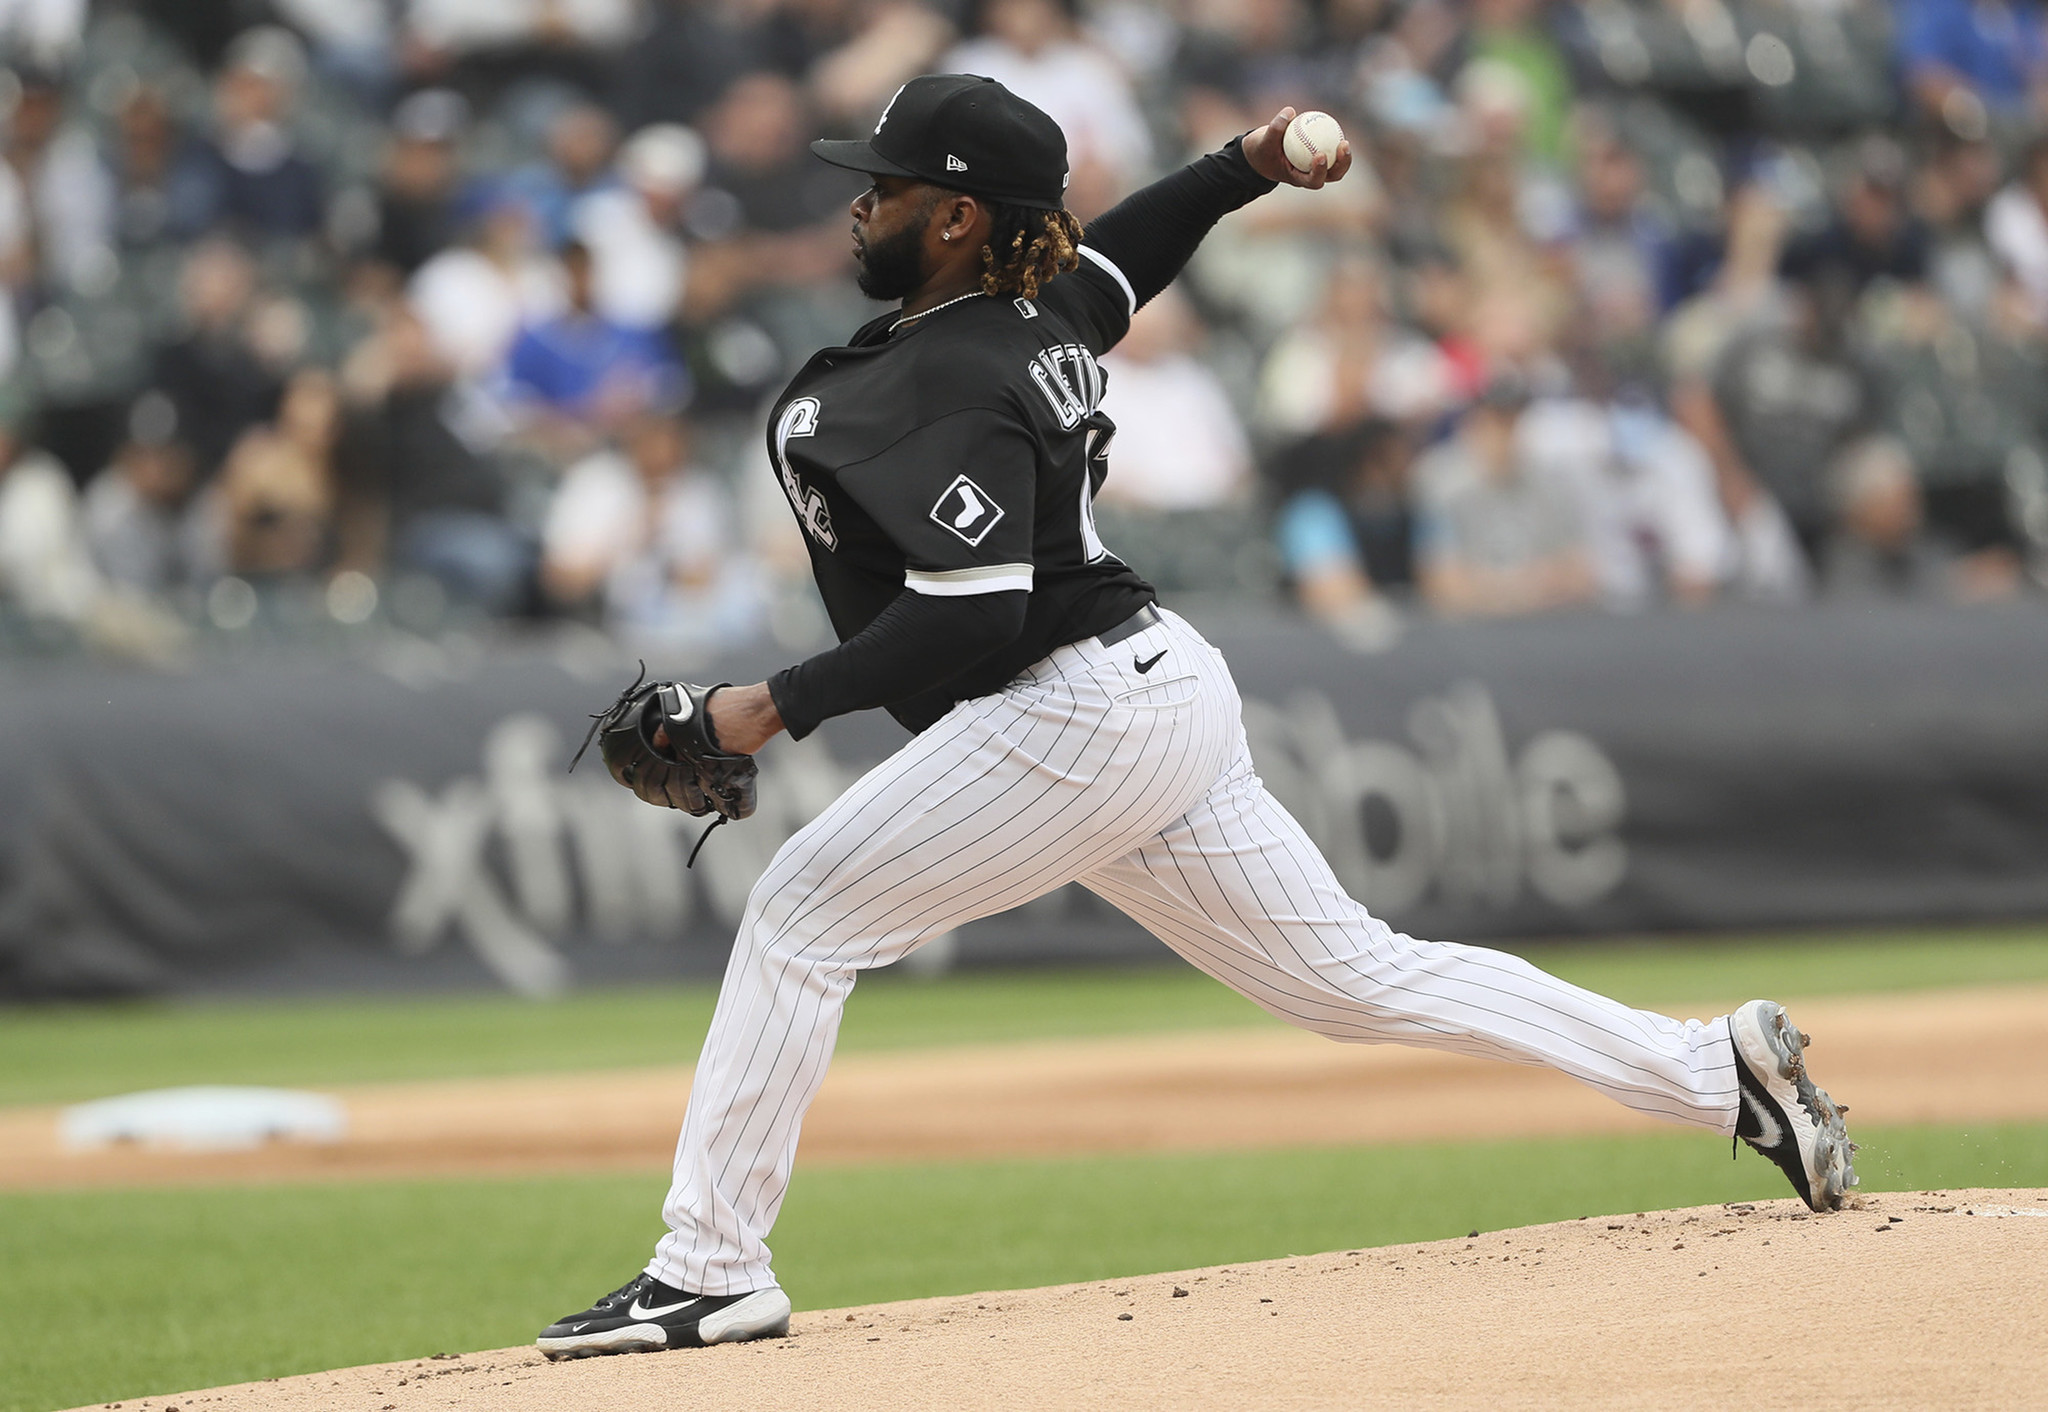 Rodón strikes out 11, White Sox blank Cubs 4-0